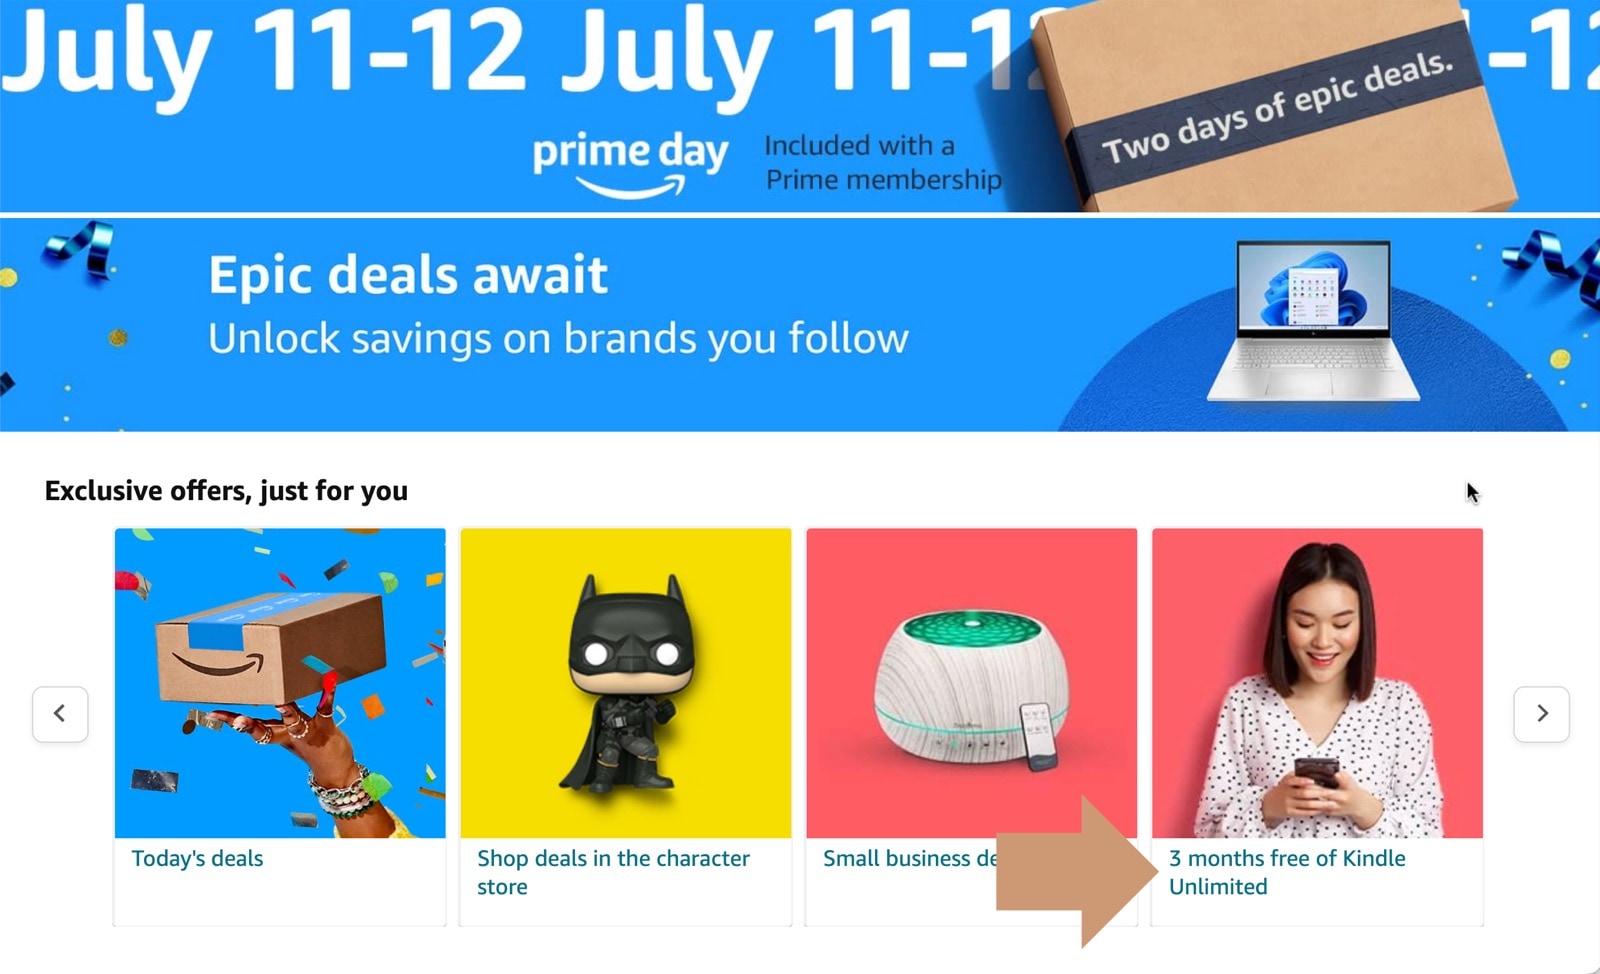 The early Prime Day 2023 deal gives you 3 months free of Kindle Unlimited